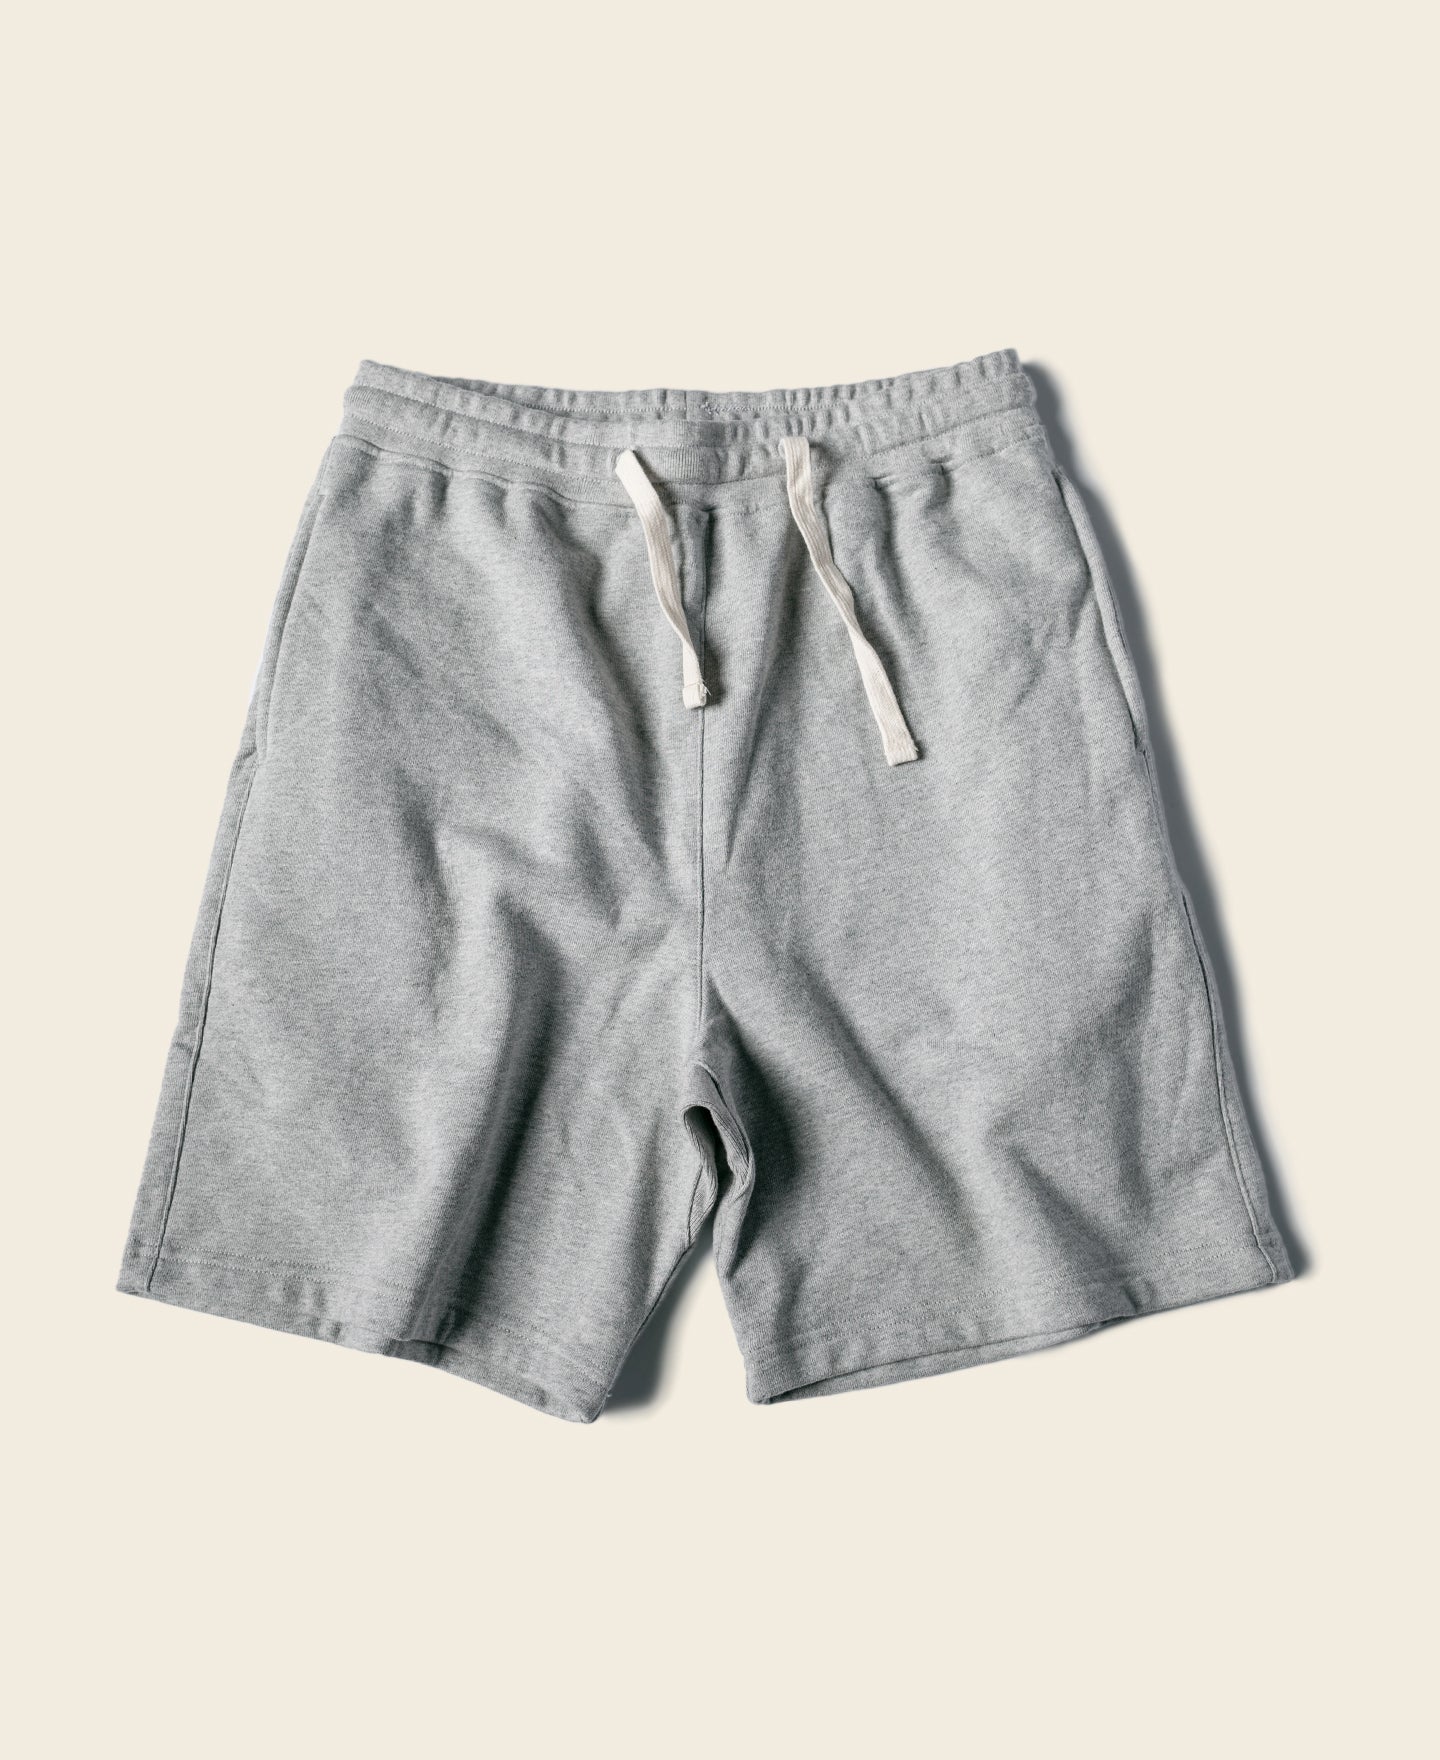 15 oz French Terry Sweat Shorts - Gray, Summer Sports Shorts